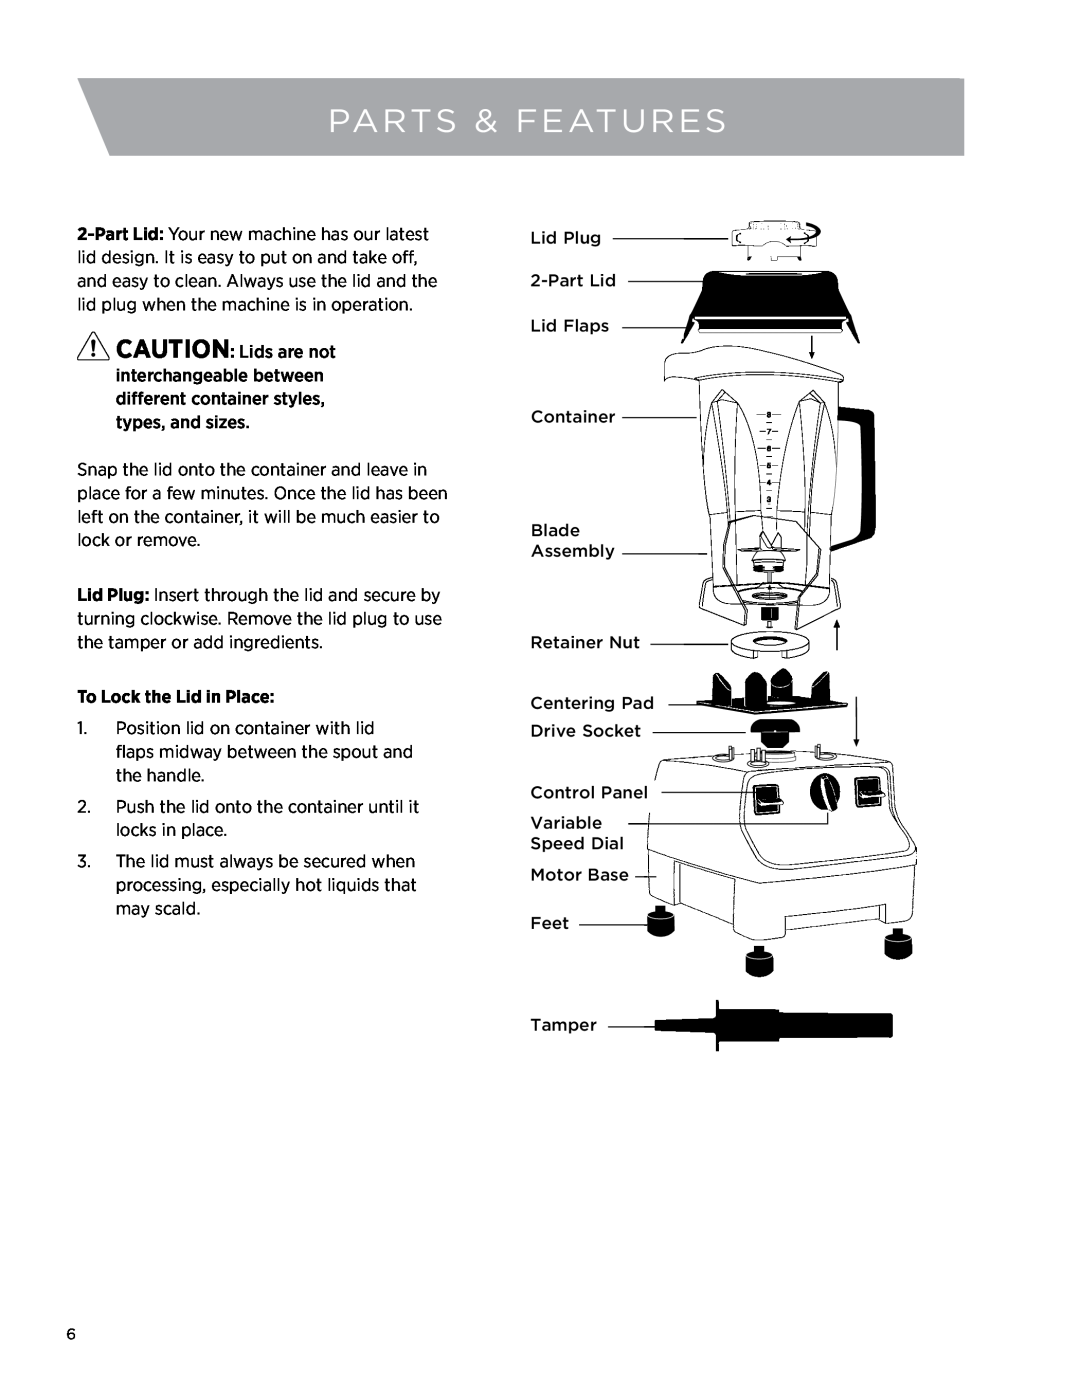 Vita-Mix 5200 owner manual parts & features, To Lock the Lid in Place 